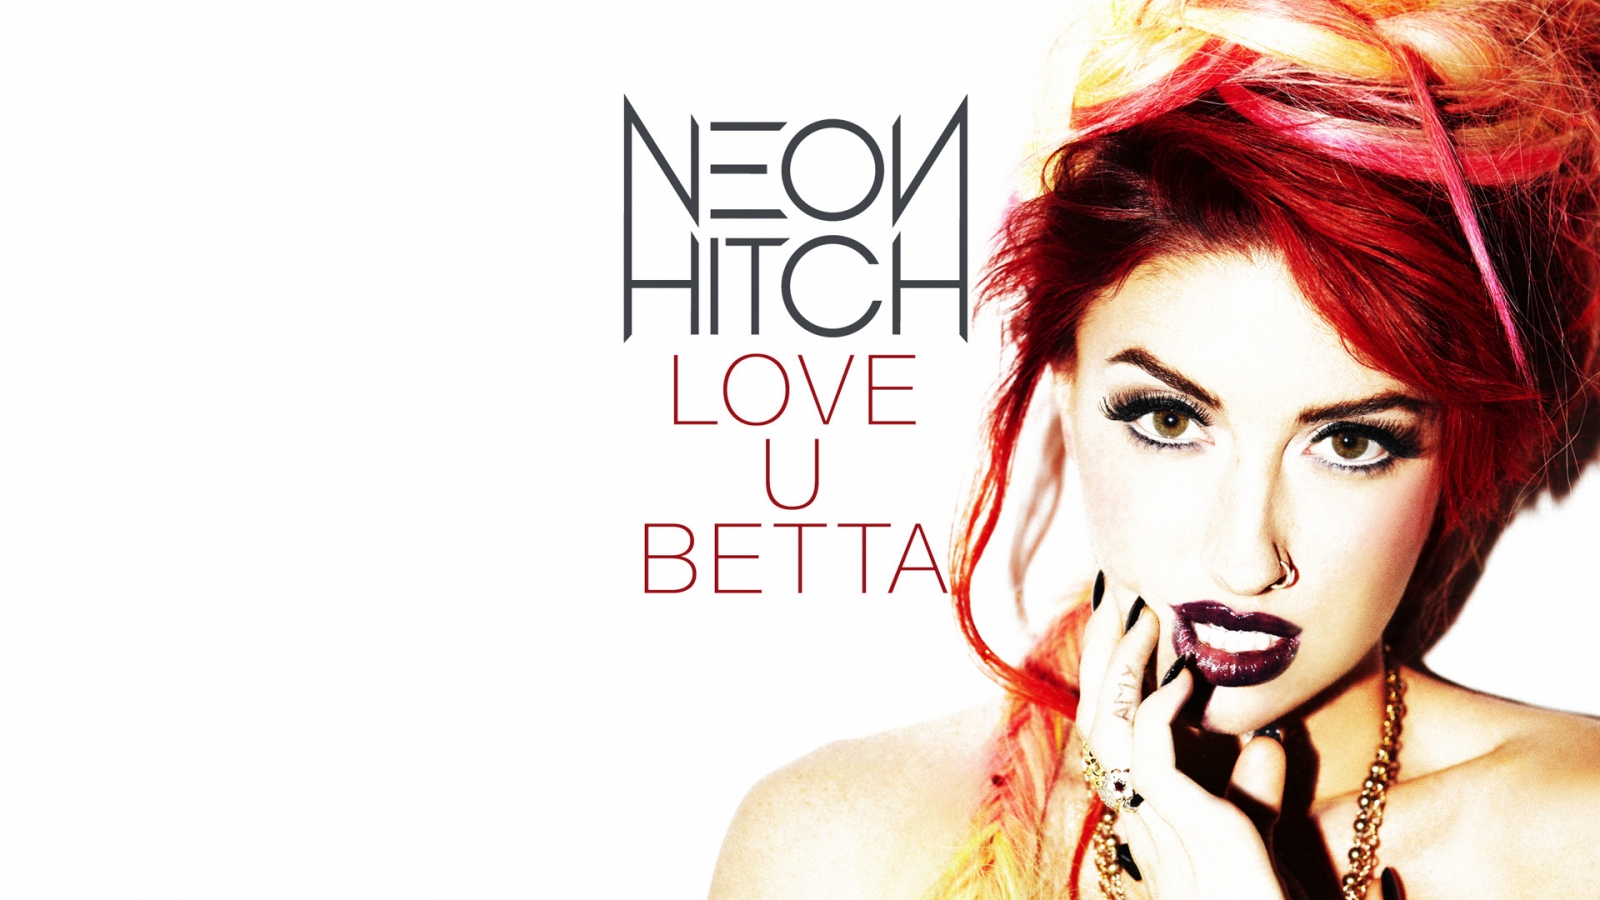 Beautiful Neon Hitch for 1600 x 900 HDTV resolution